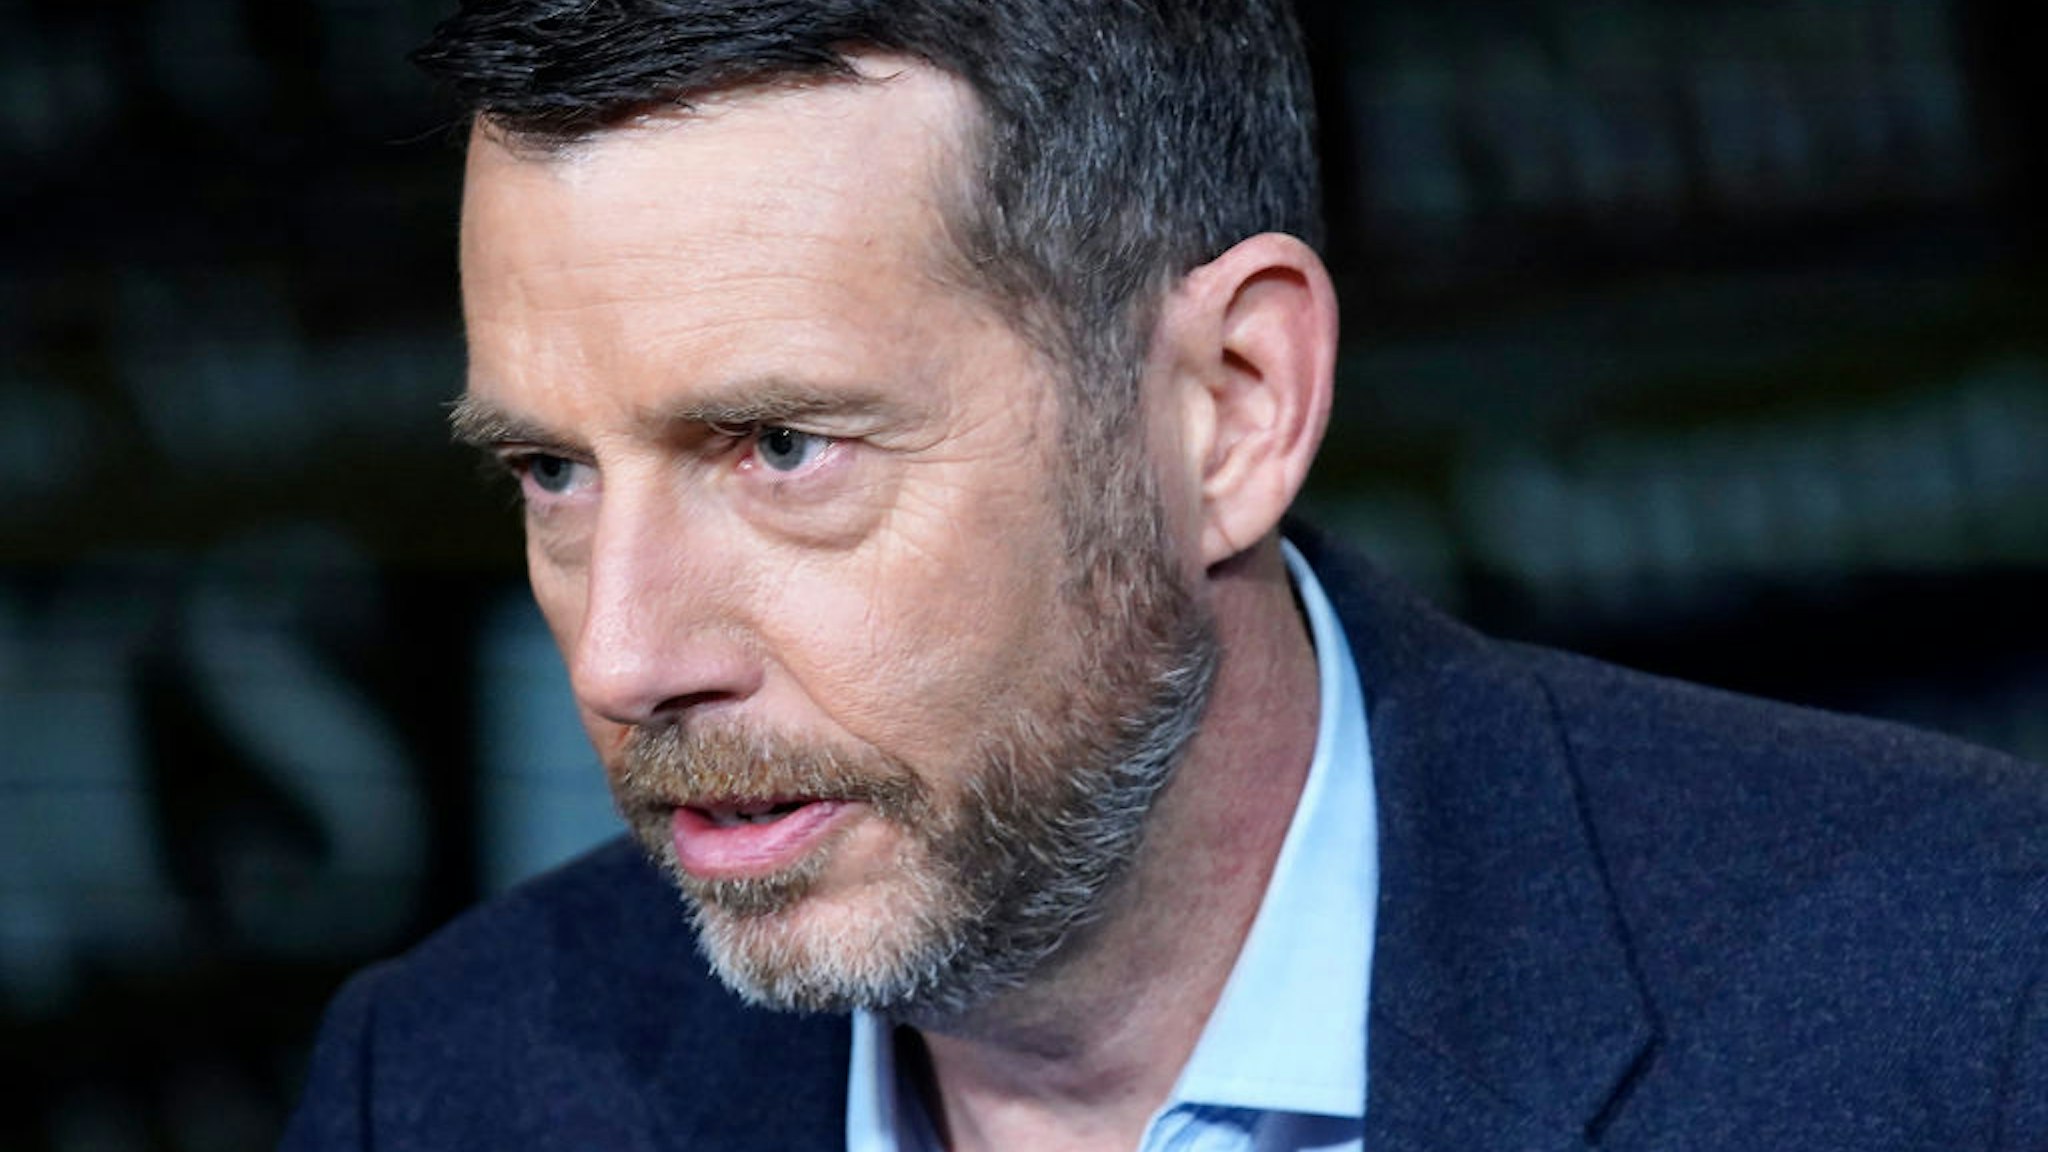 Political strategist David Plouffe visits "Wall Street At Large" at Fox Business Network Studios on March 04, 2020 in New York City. (Photo by John Lamparski/Getty Images)